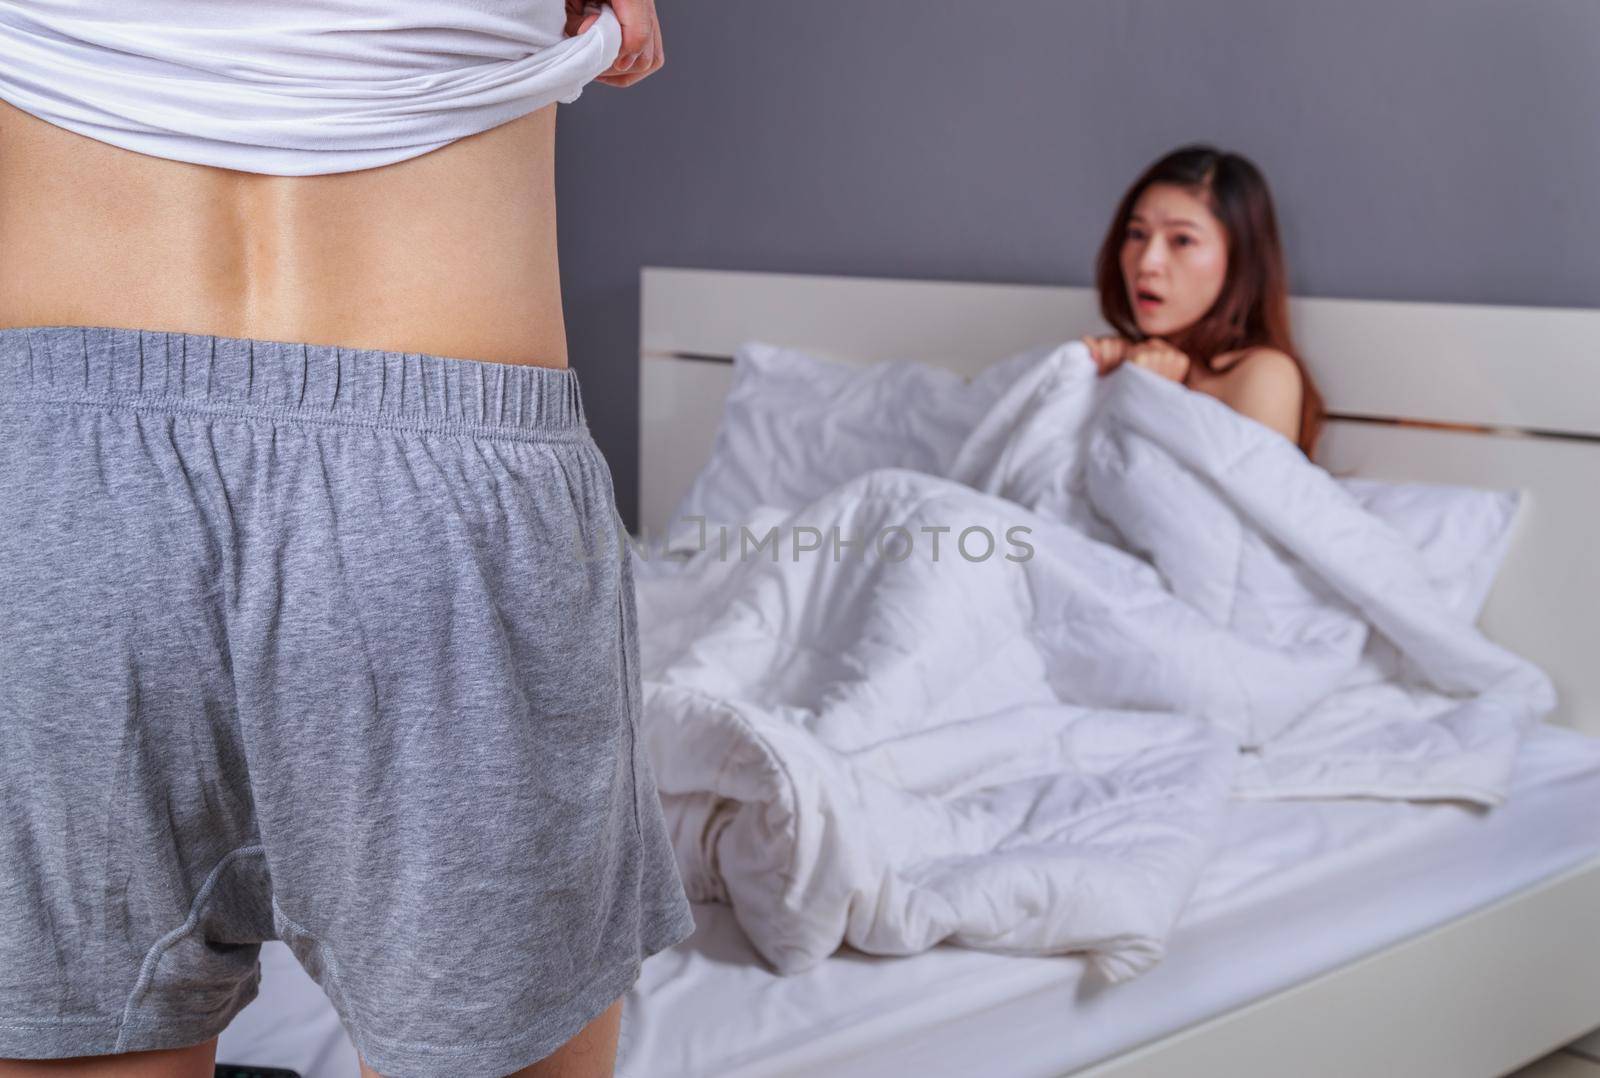 couple in bedroom is having sex, man taking his clothes off with woman sitting on a bed